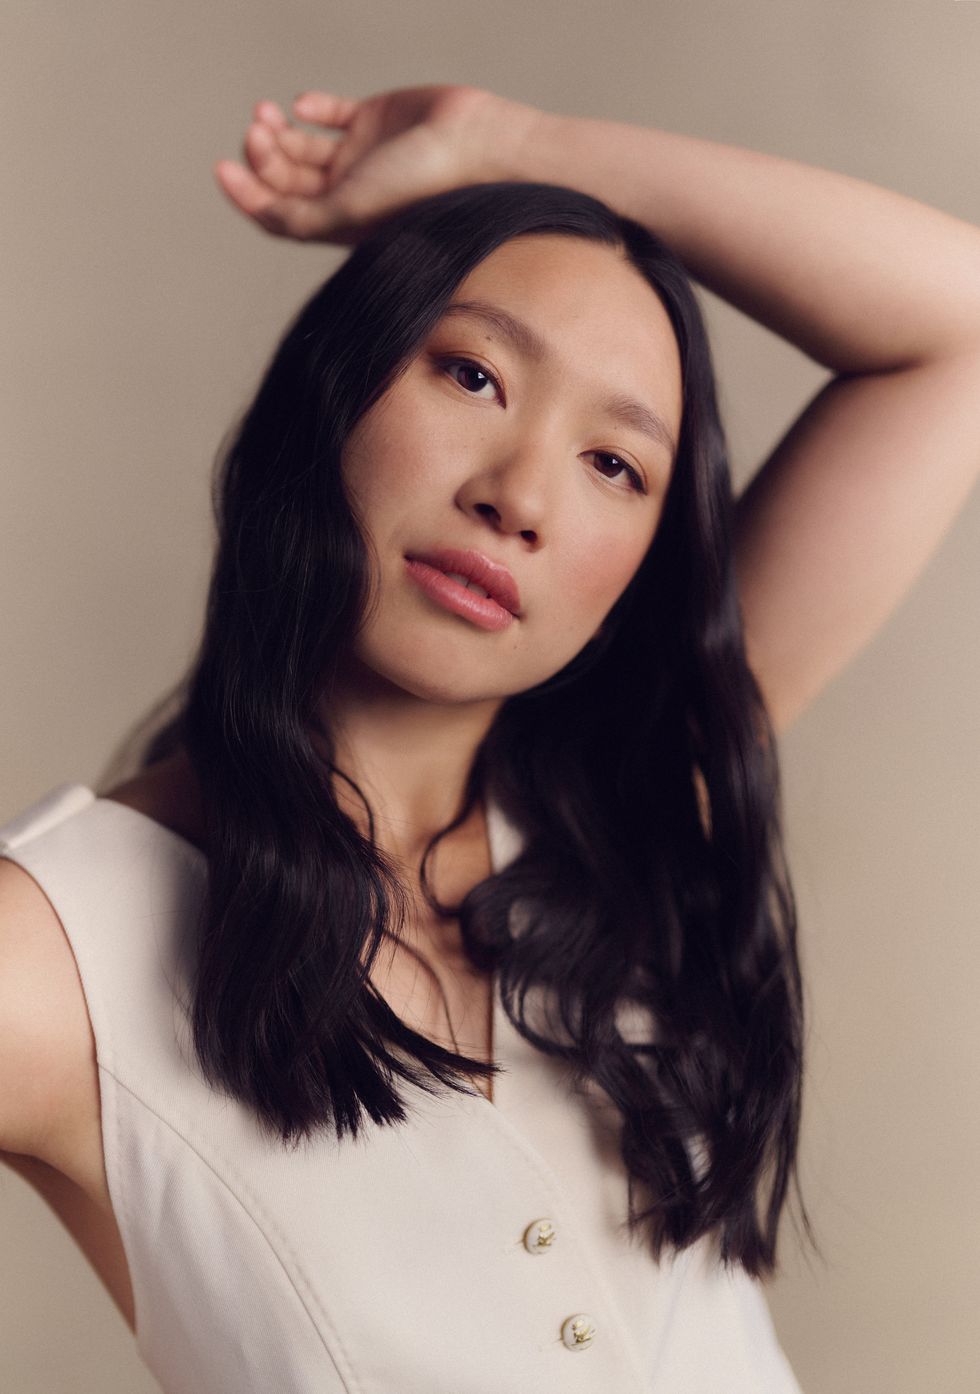 jess hong posing with one arm over her head